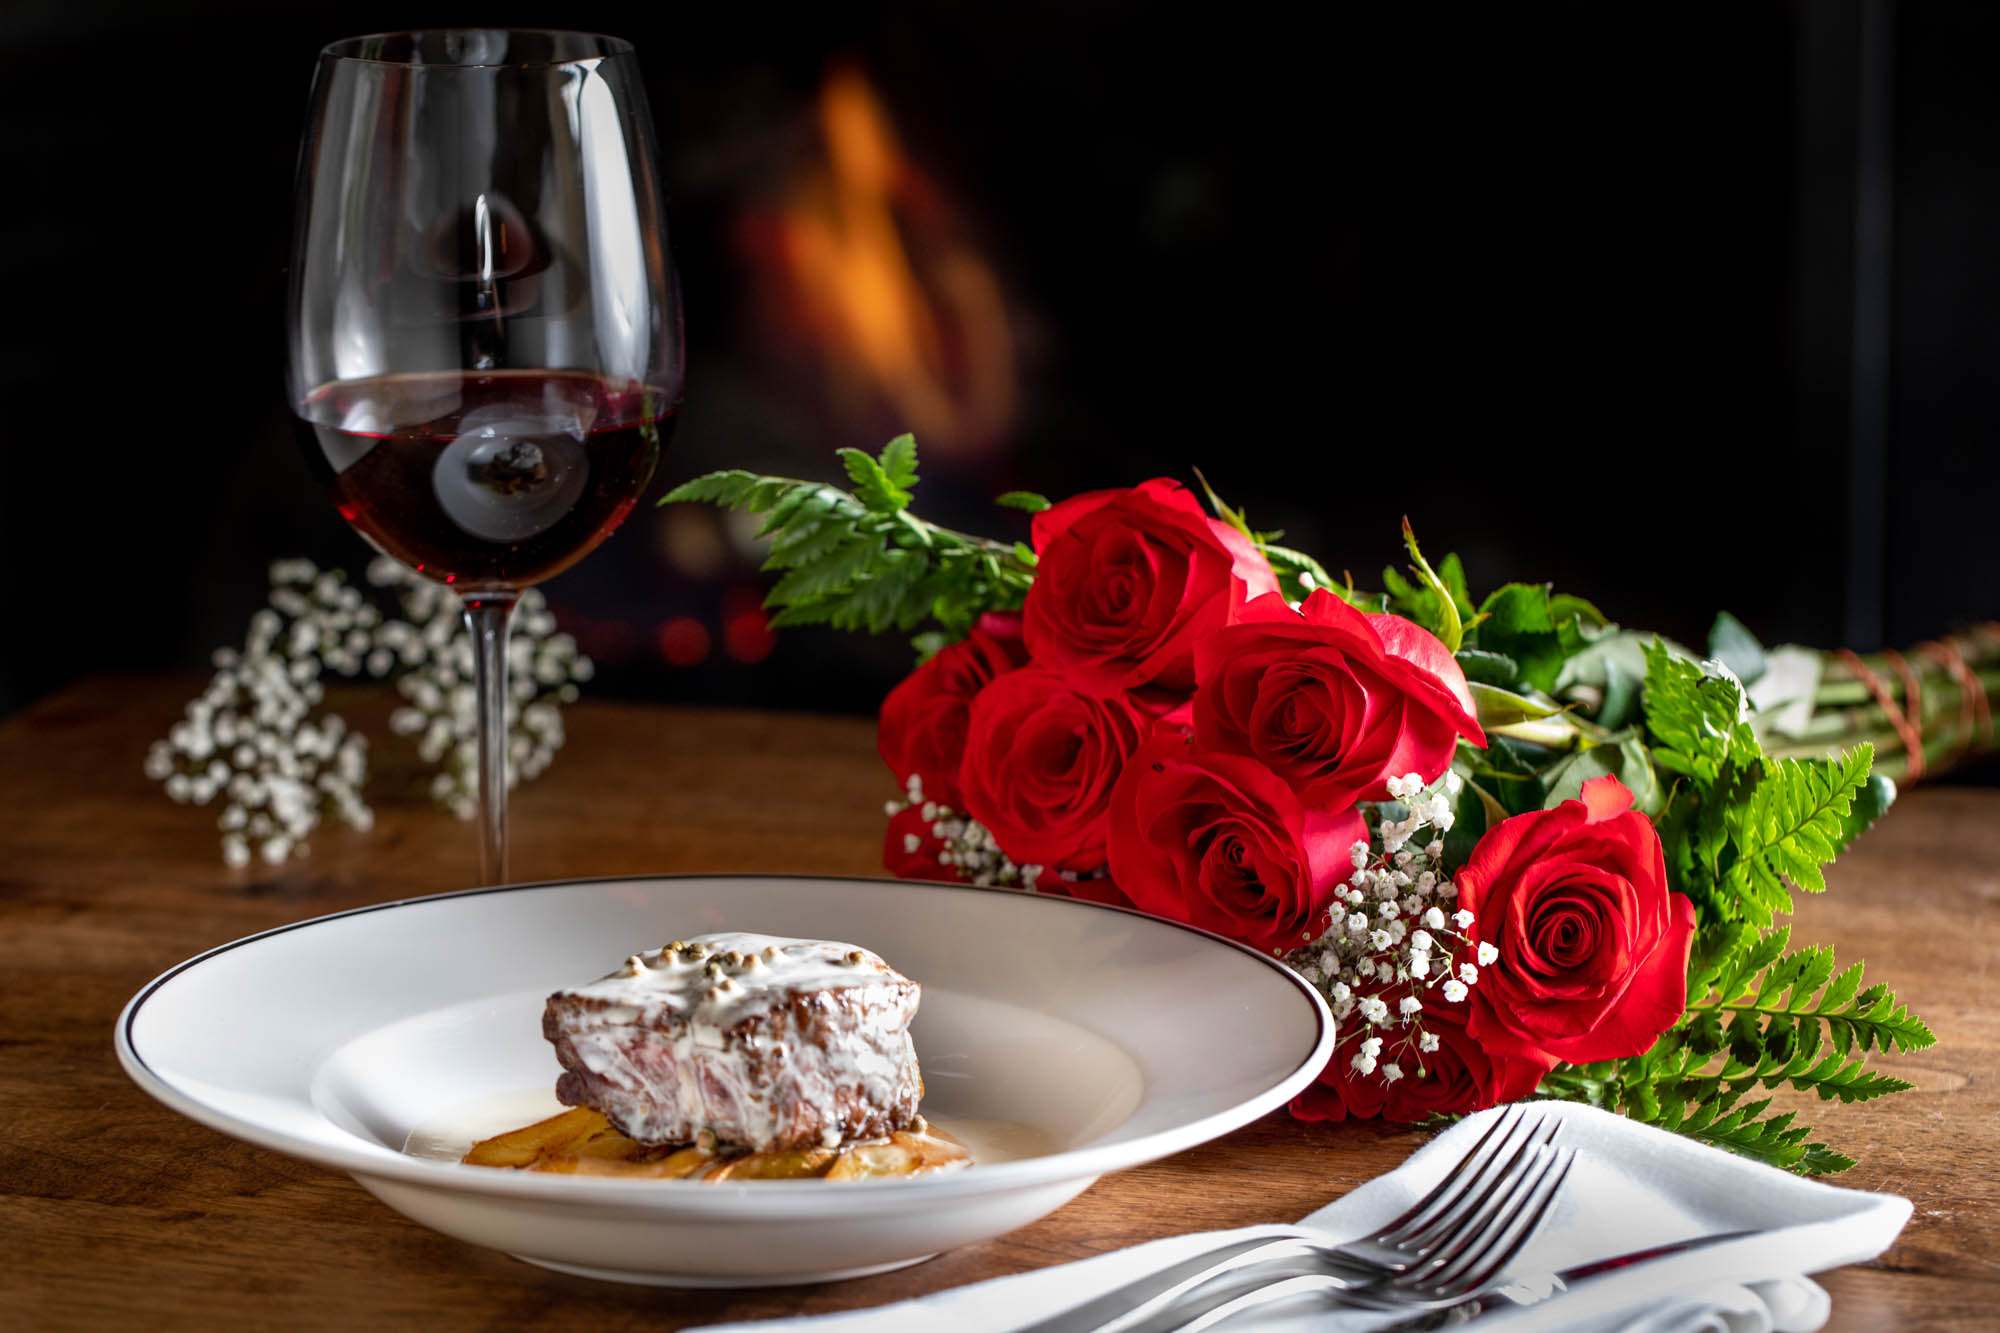 A romantic dish of food and a dozen roses photographed for Valentines Day.